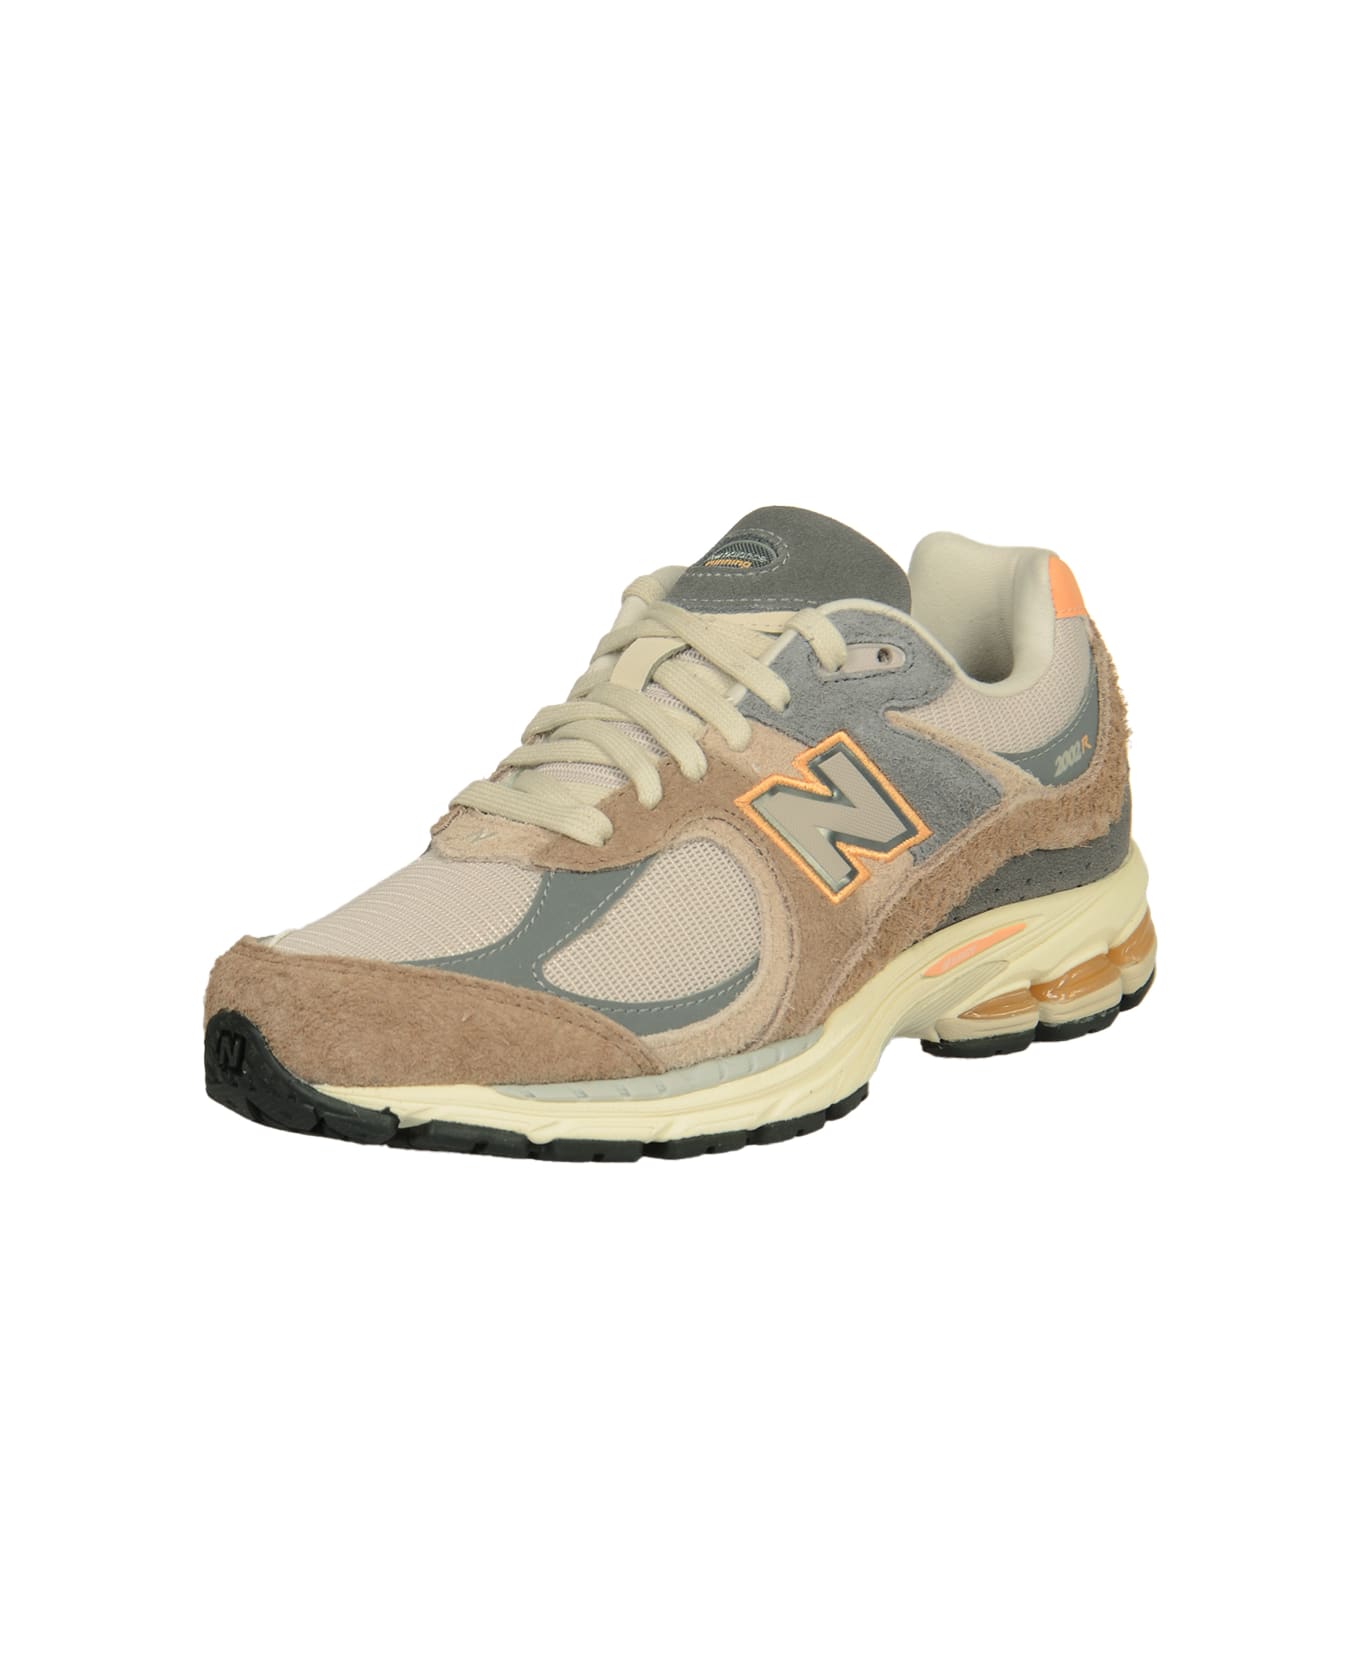 New Balance Logo Patched Sneakers - MULTICOLOR